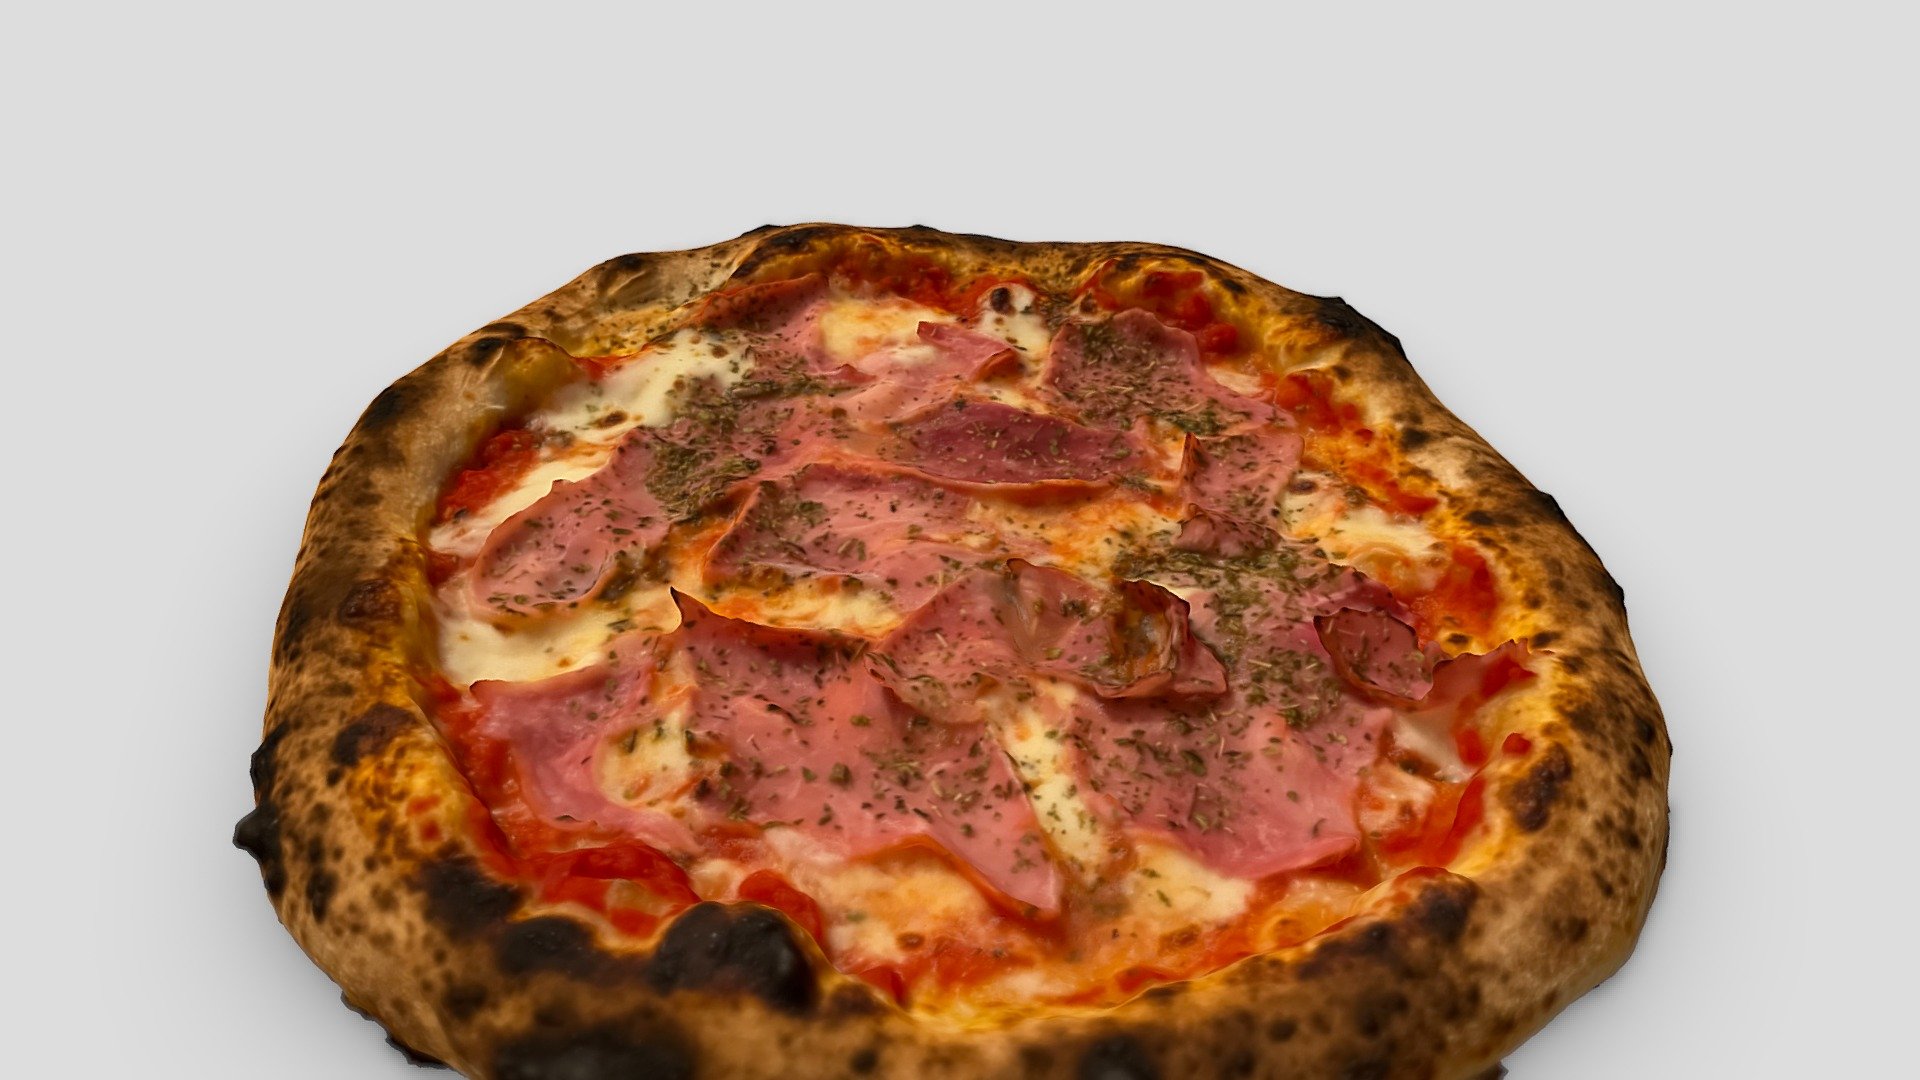 Homemade ham pizza, cooked with the branner oven.

Captured with RealityScan - Homemade ham pizza - 3D model by alban 3d model